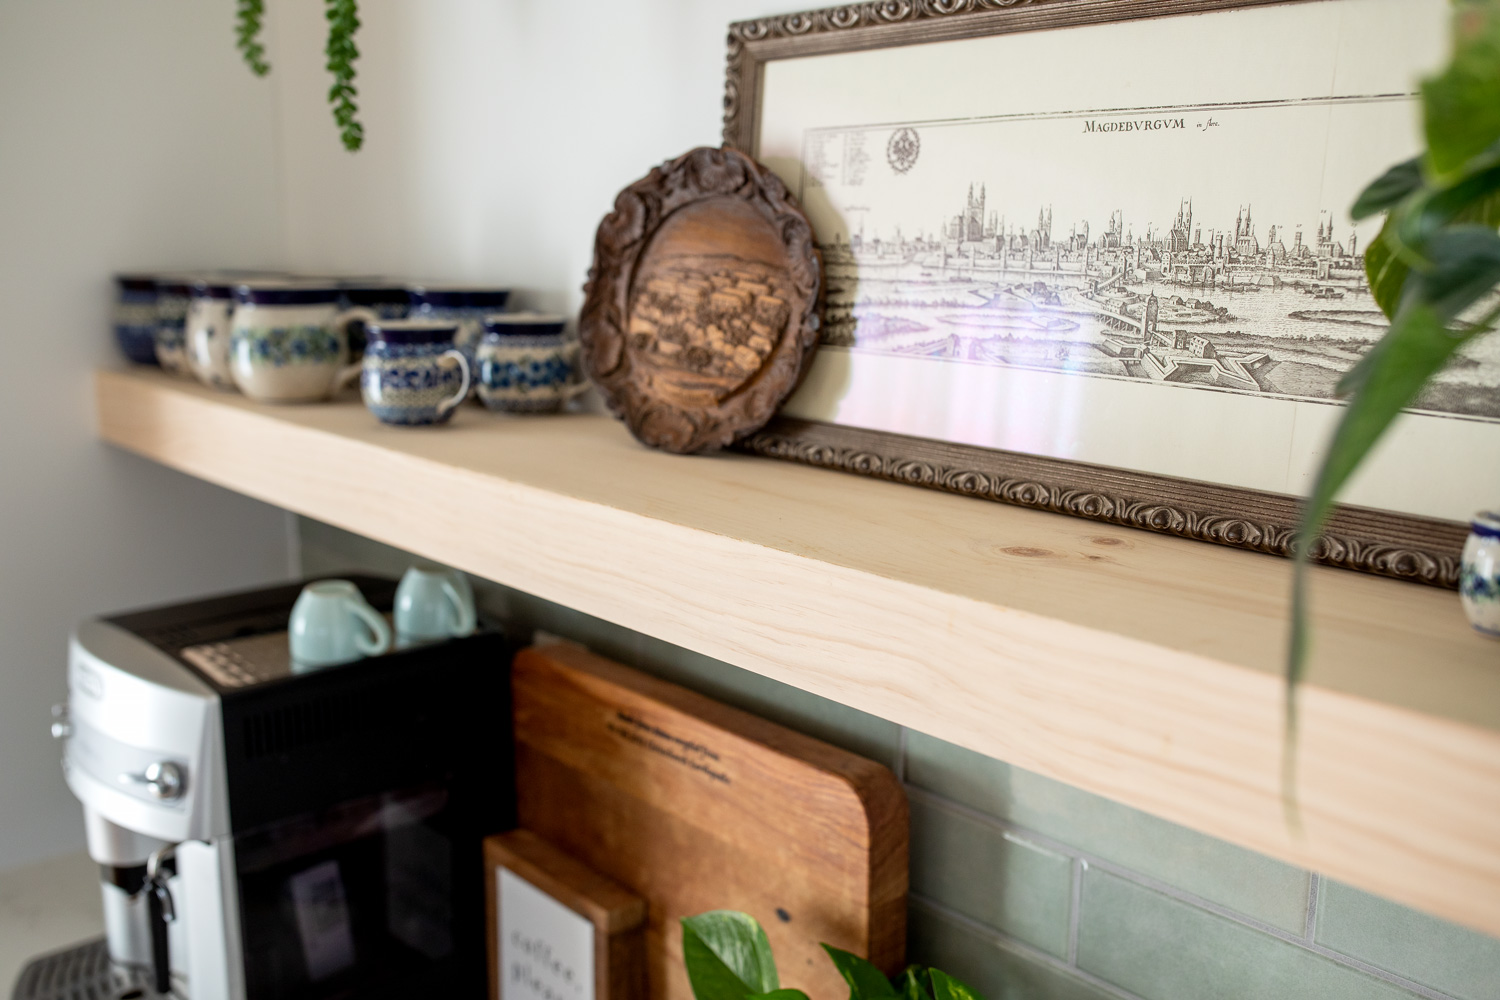 DIY Kitchen Floating Shelves & Lessons Learned - Angela Marie Made